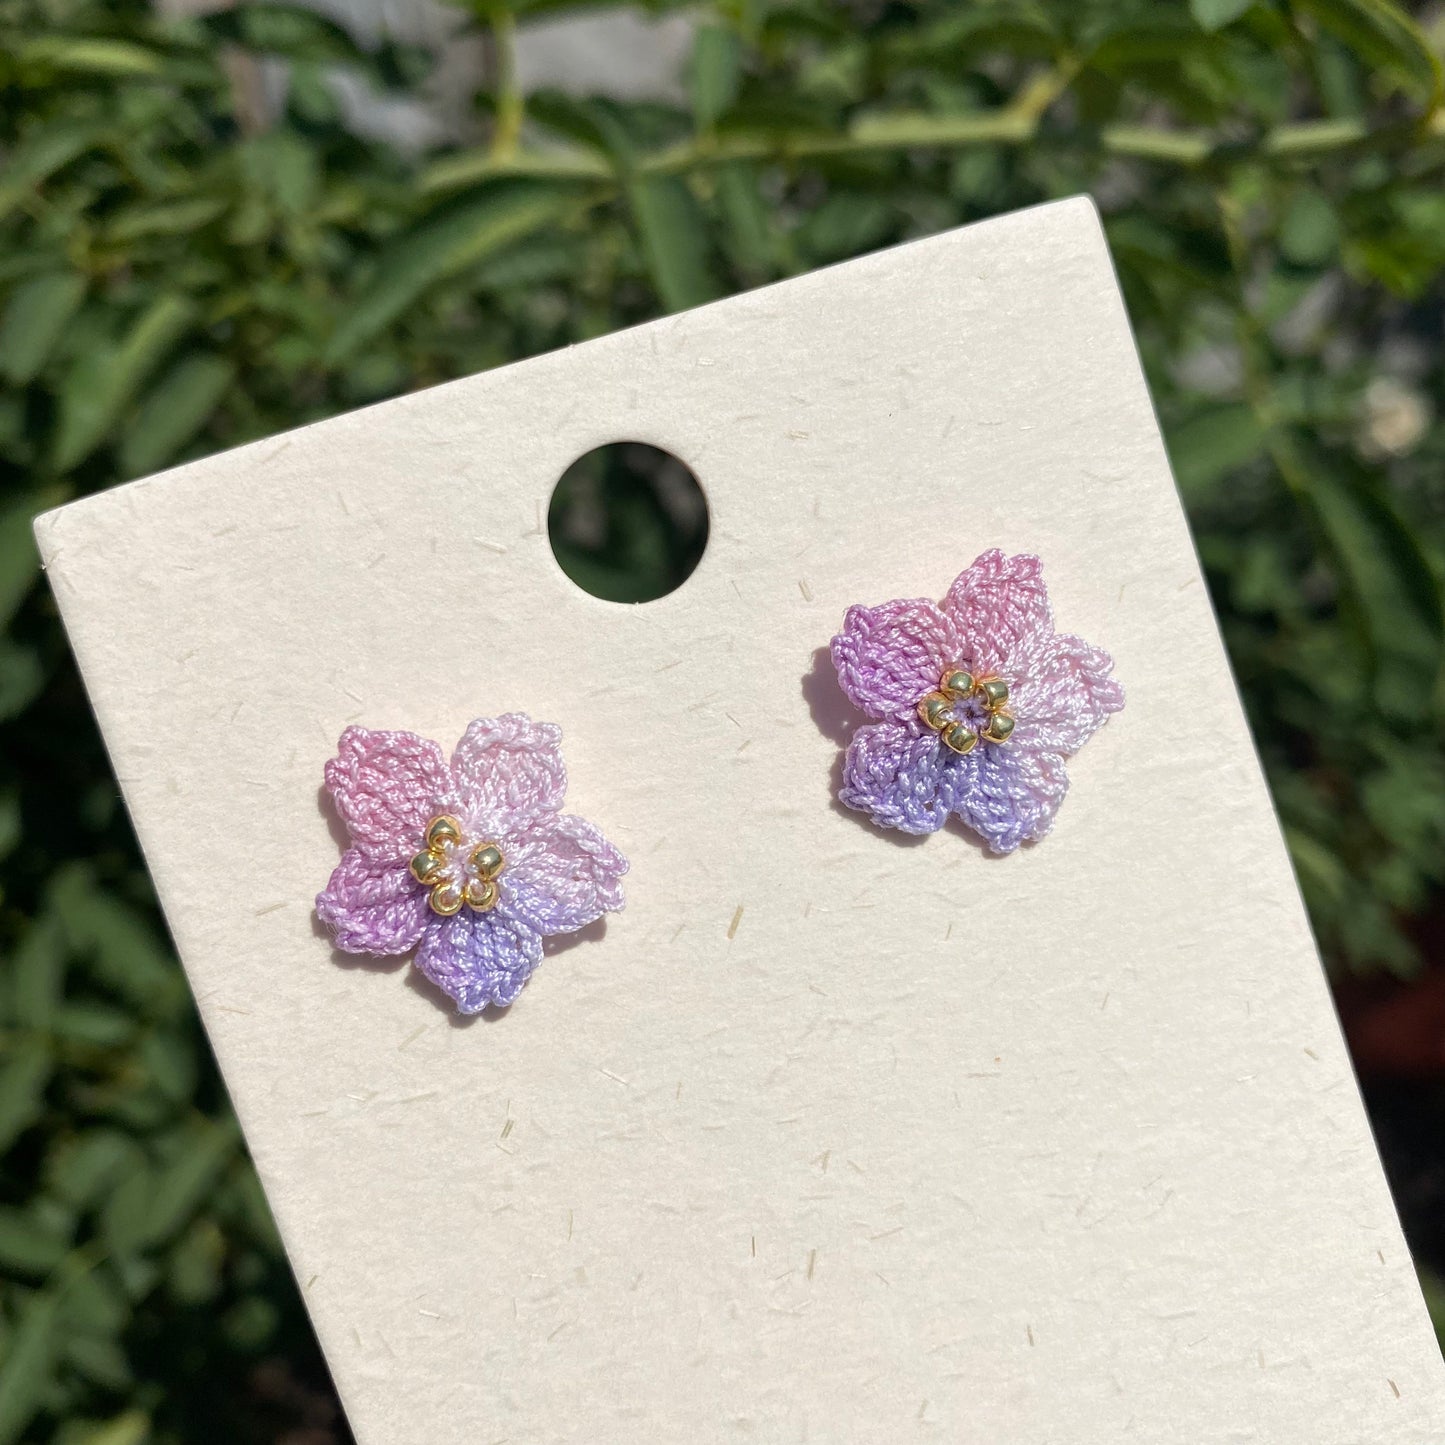 Japanese Cherry blossom crochet stud earrings/Microcrochet/Purple Pink Ombre flower with gold beads/Summer gift for her/Japanese new year